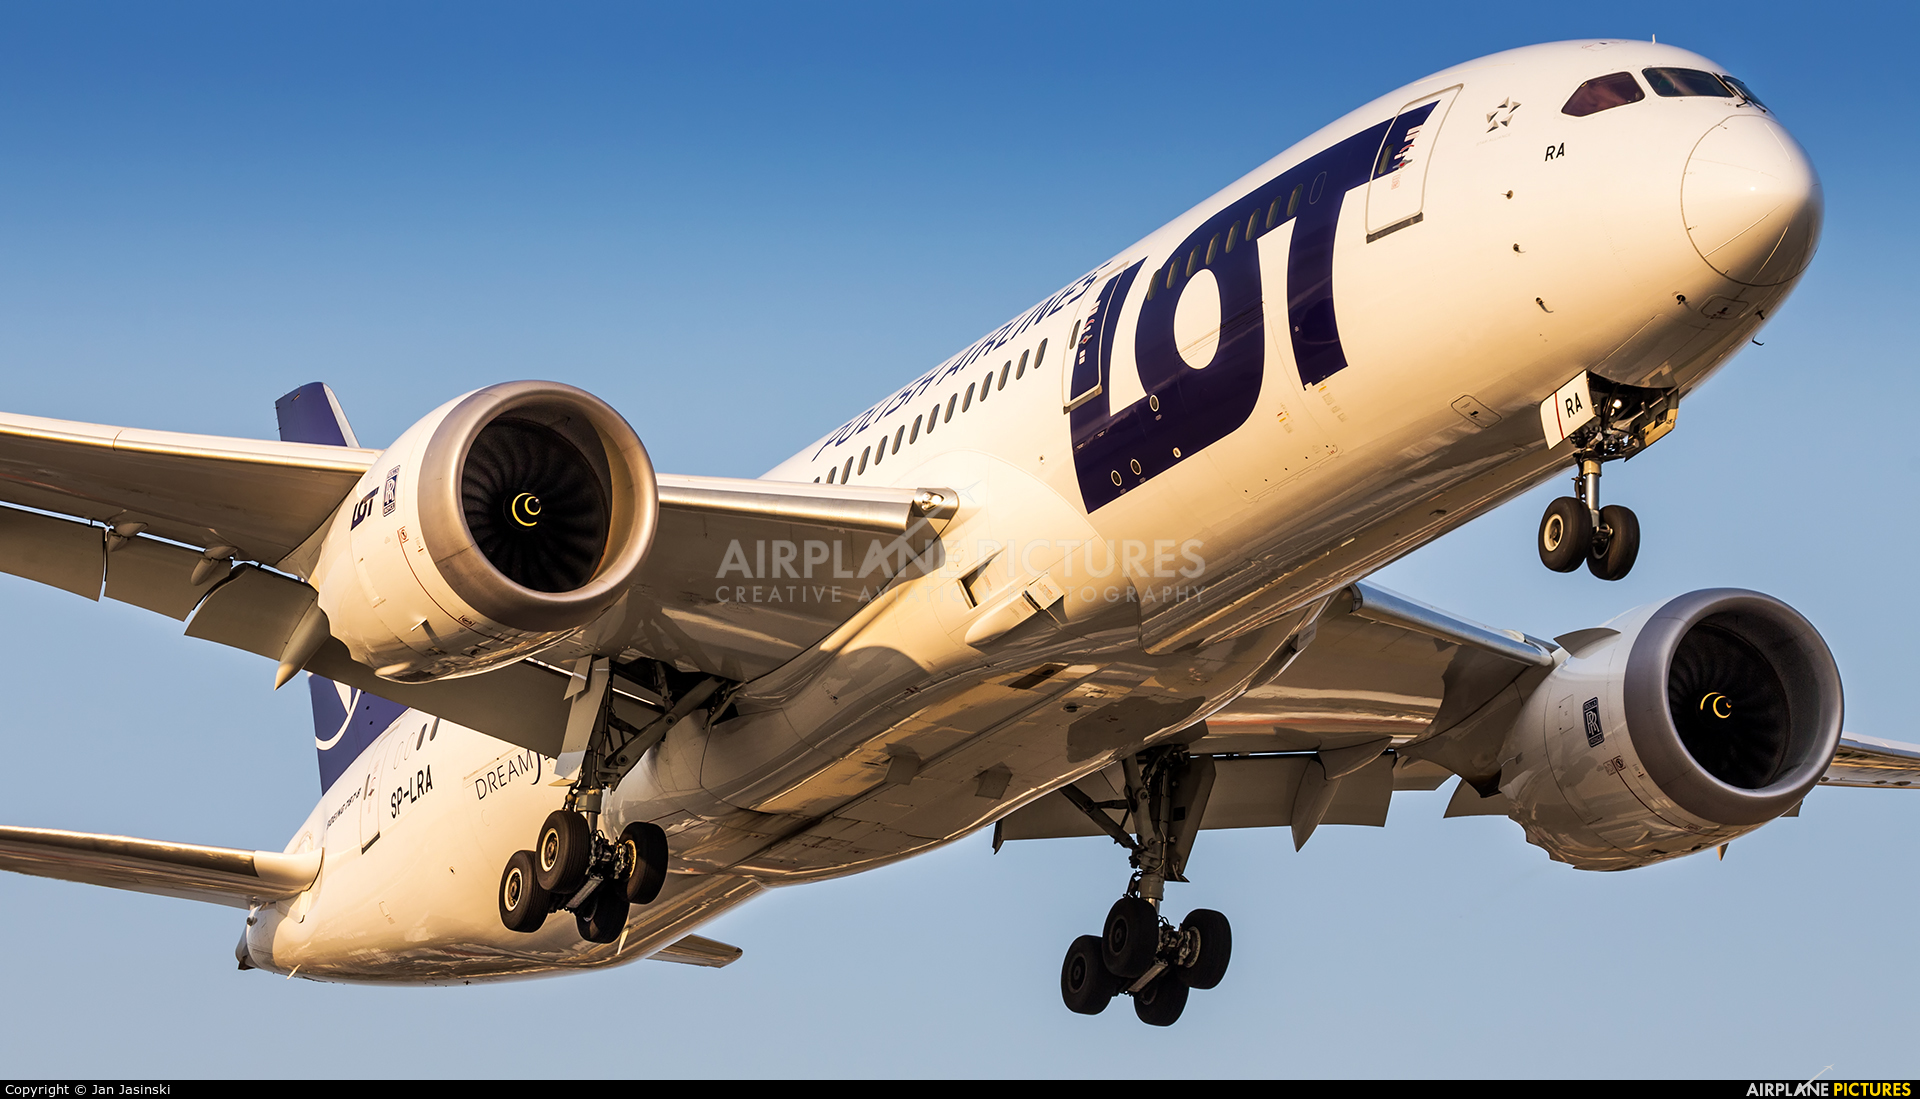 LOT - Polish Airlines SP-LRA aircraft at Toronto - Pearson Intl, ON